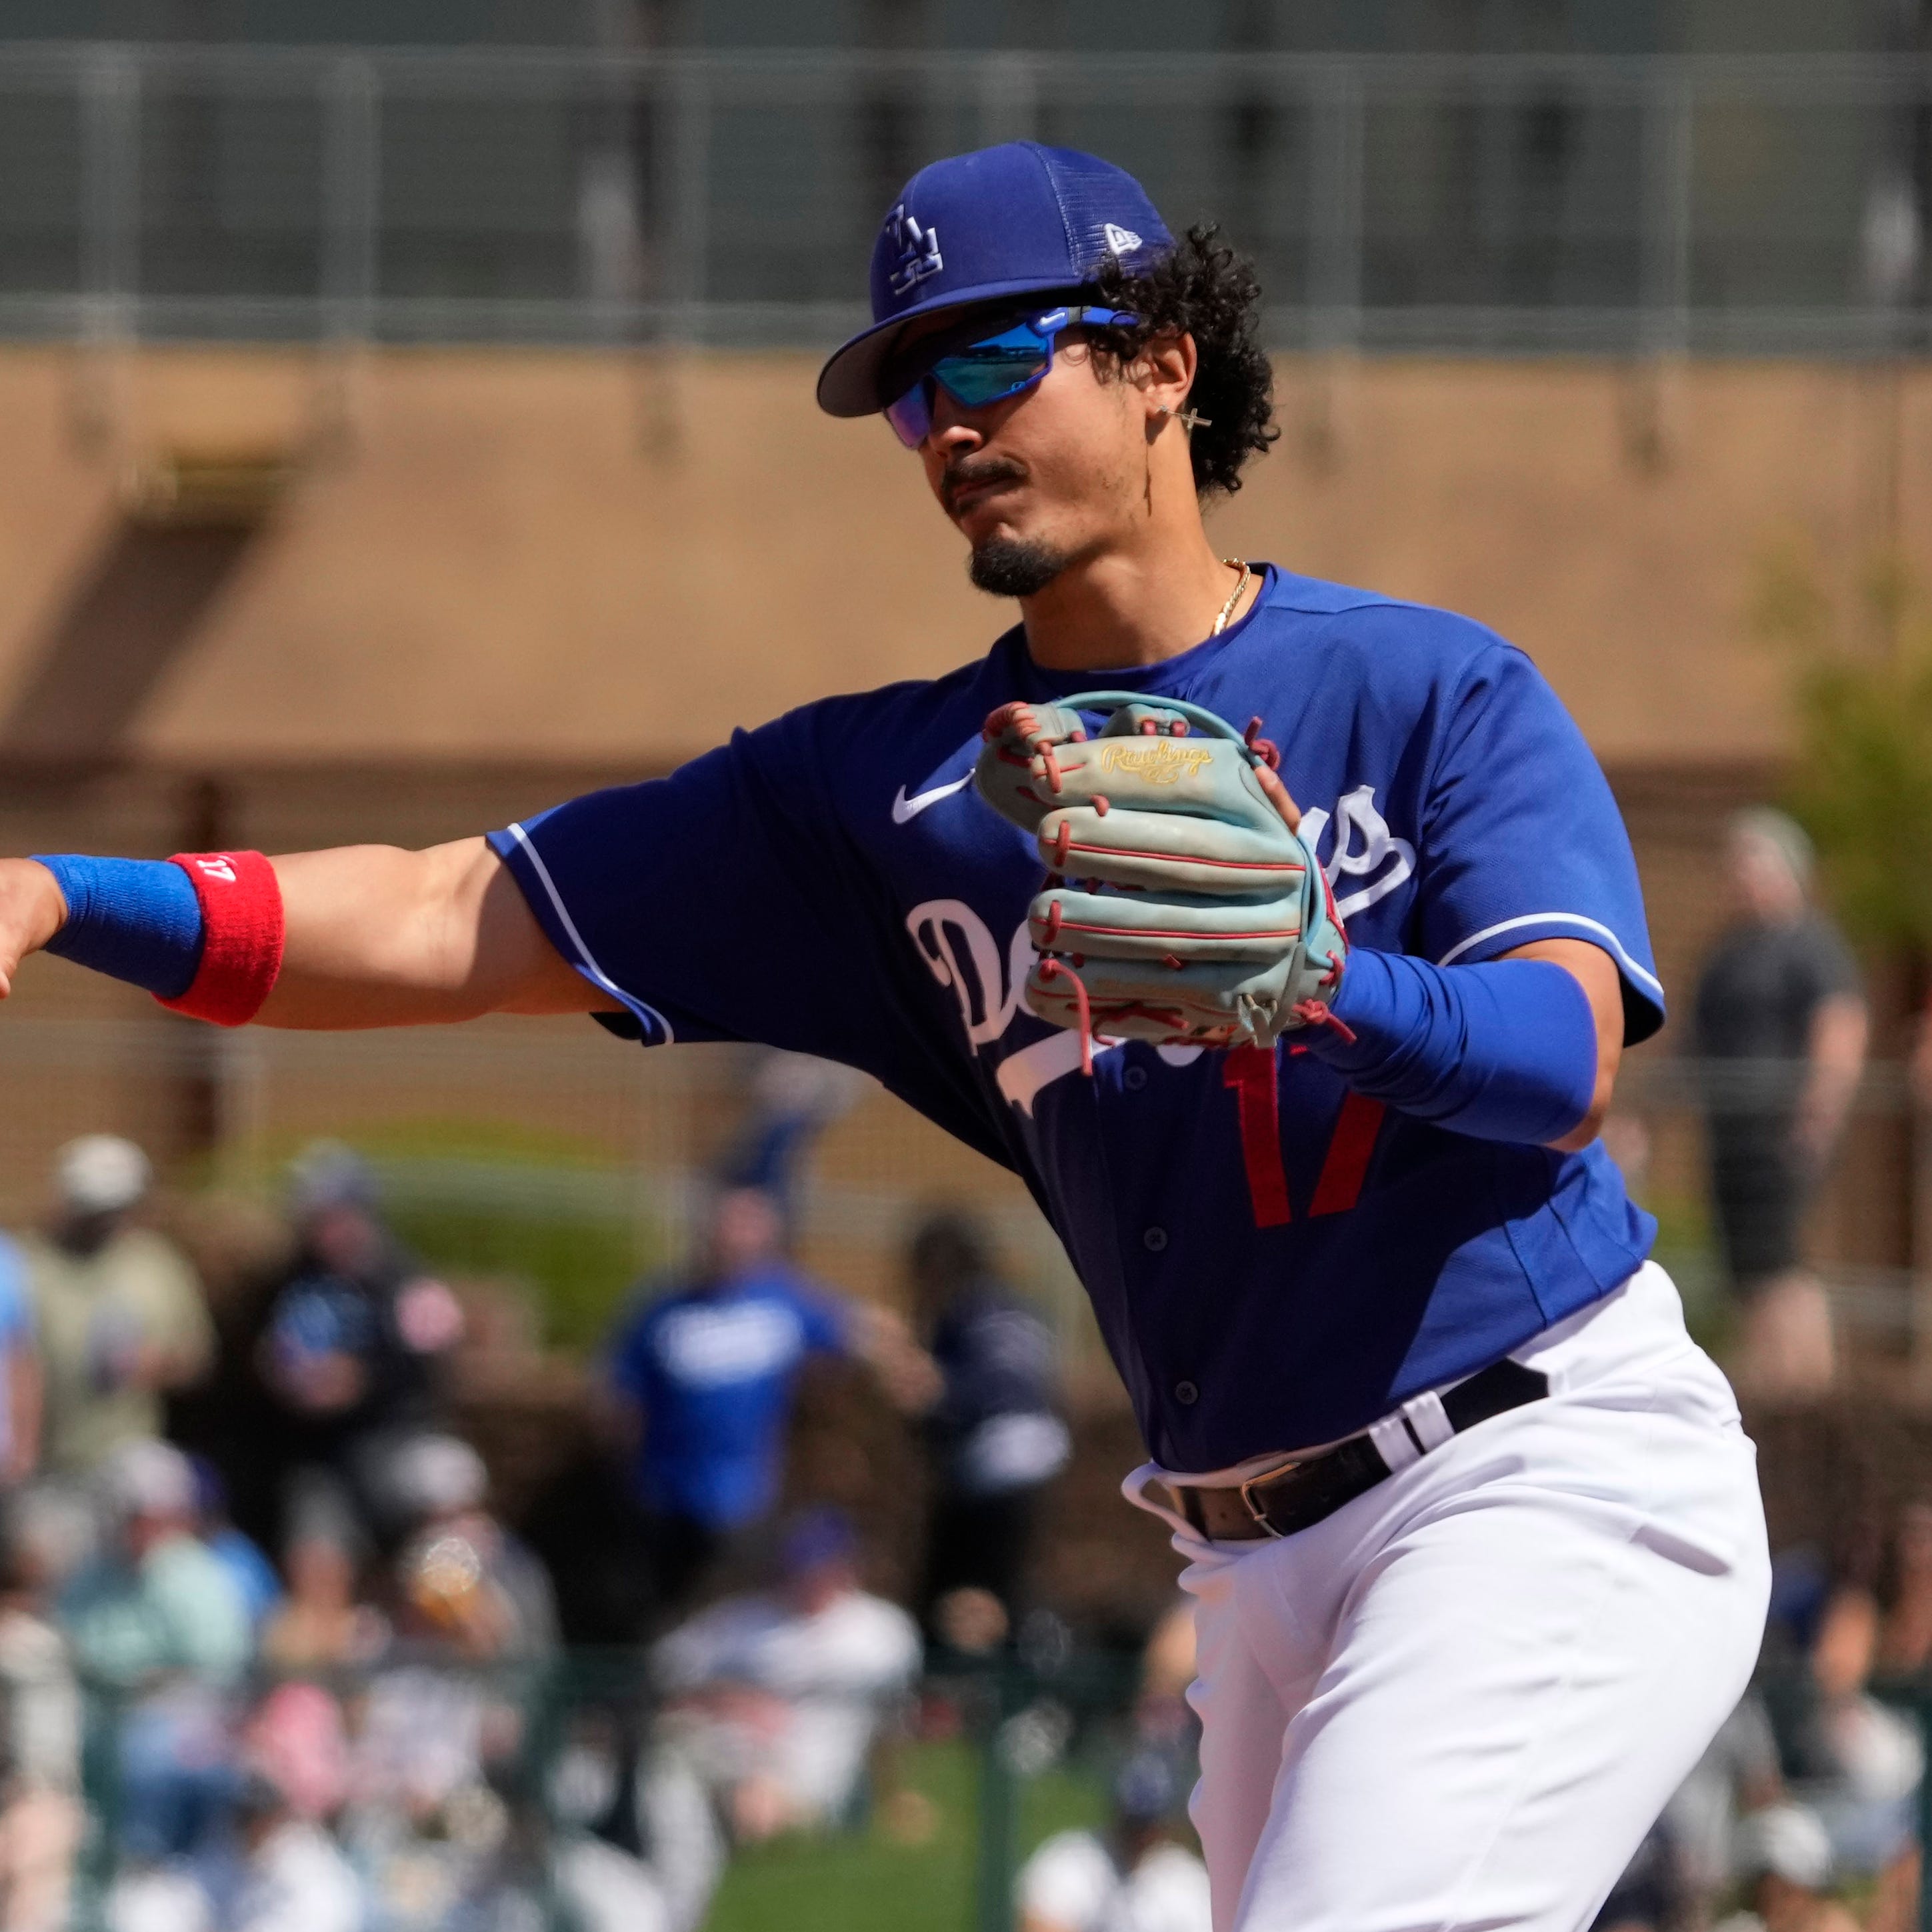 Dodgers prospect Miguel Vargas has moved to second base this season after playing first and third in his first taste of the majors last year.